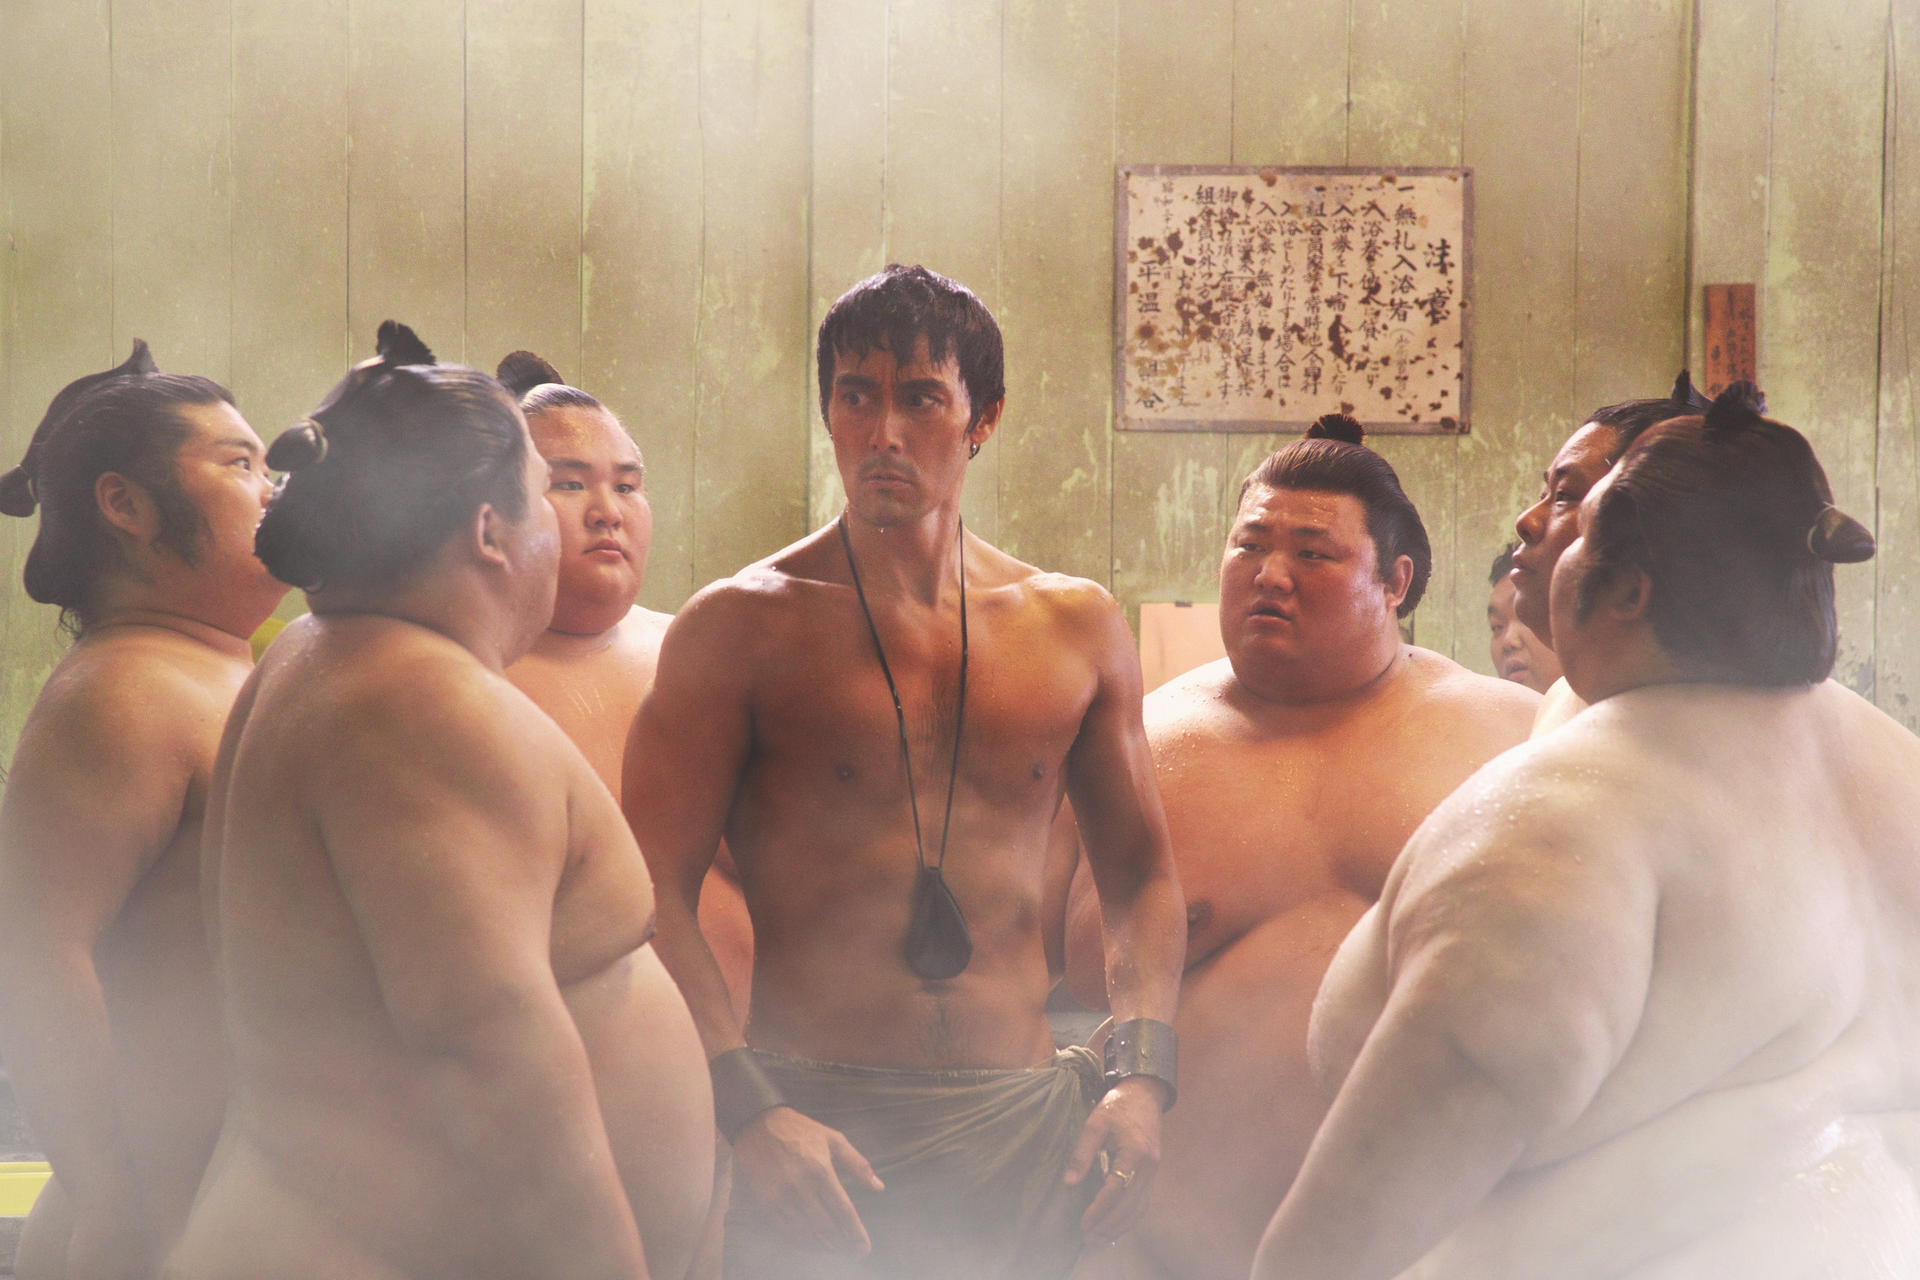 Back in hot water: Lucius Modestus (Hiroshi Abe) with sumo wrestlers in Thermae Romae II.